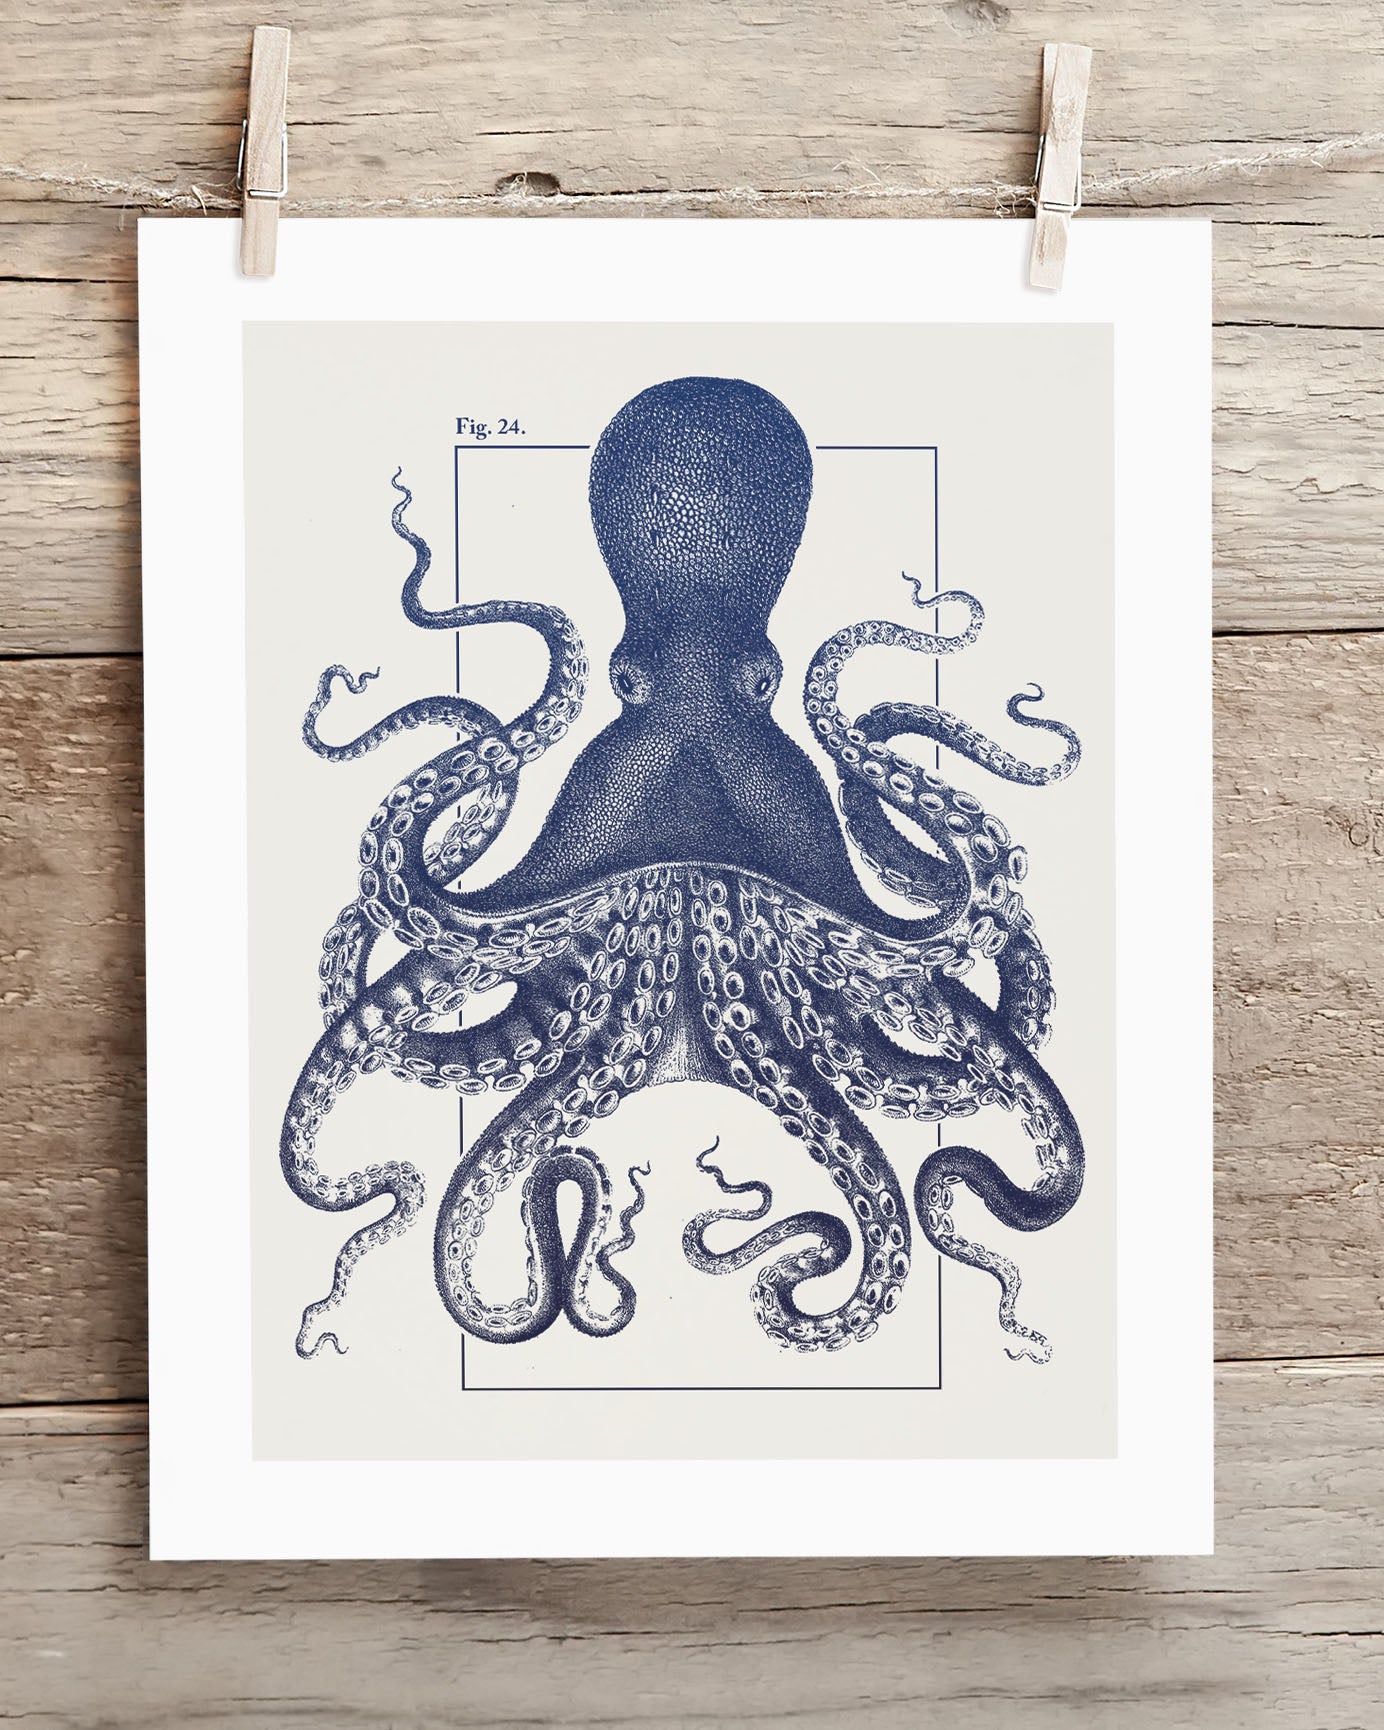 A Cognitive Surplus Octopus Scientific Illustration Museum Print hanging on a wooden wall.